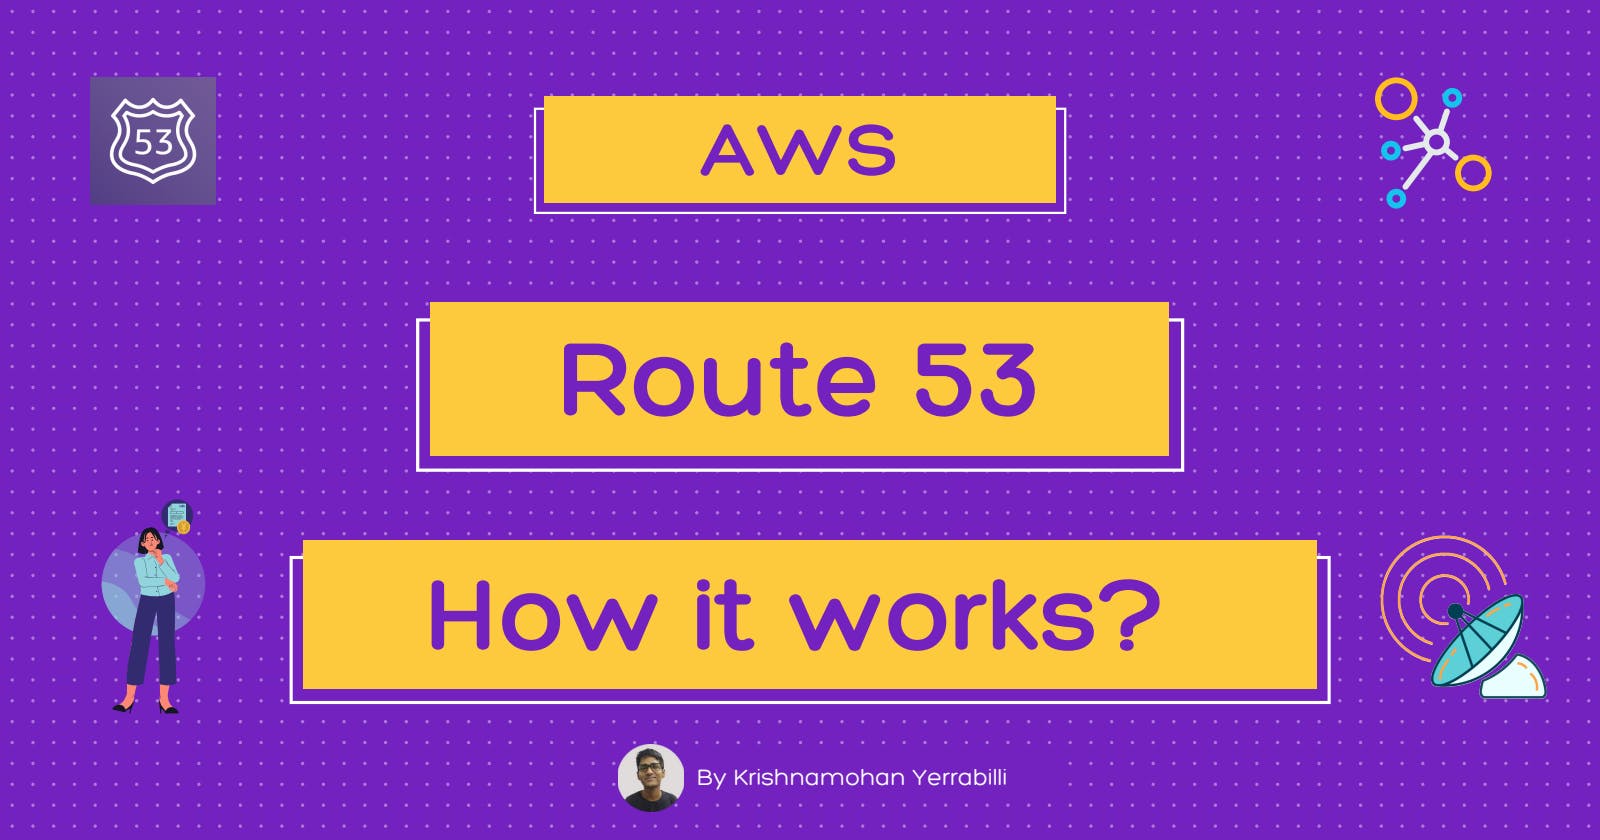 All you need to know about Amazon Route 53